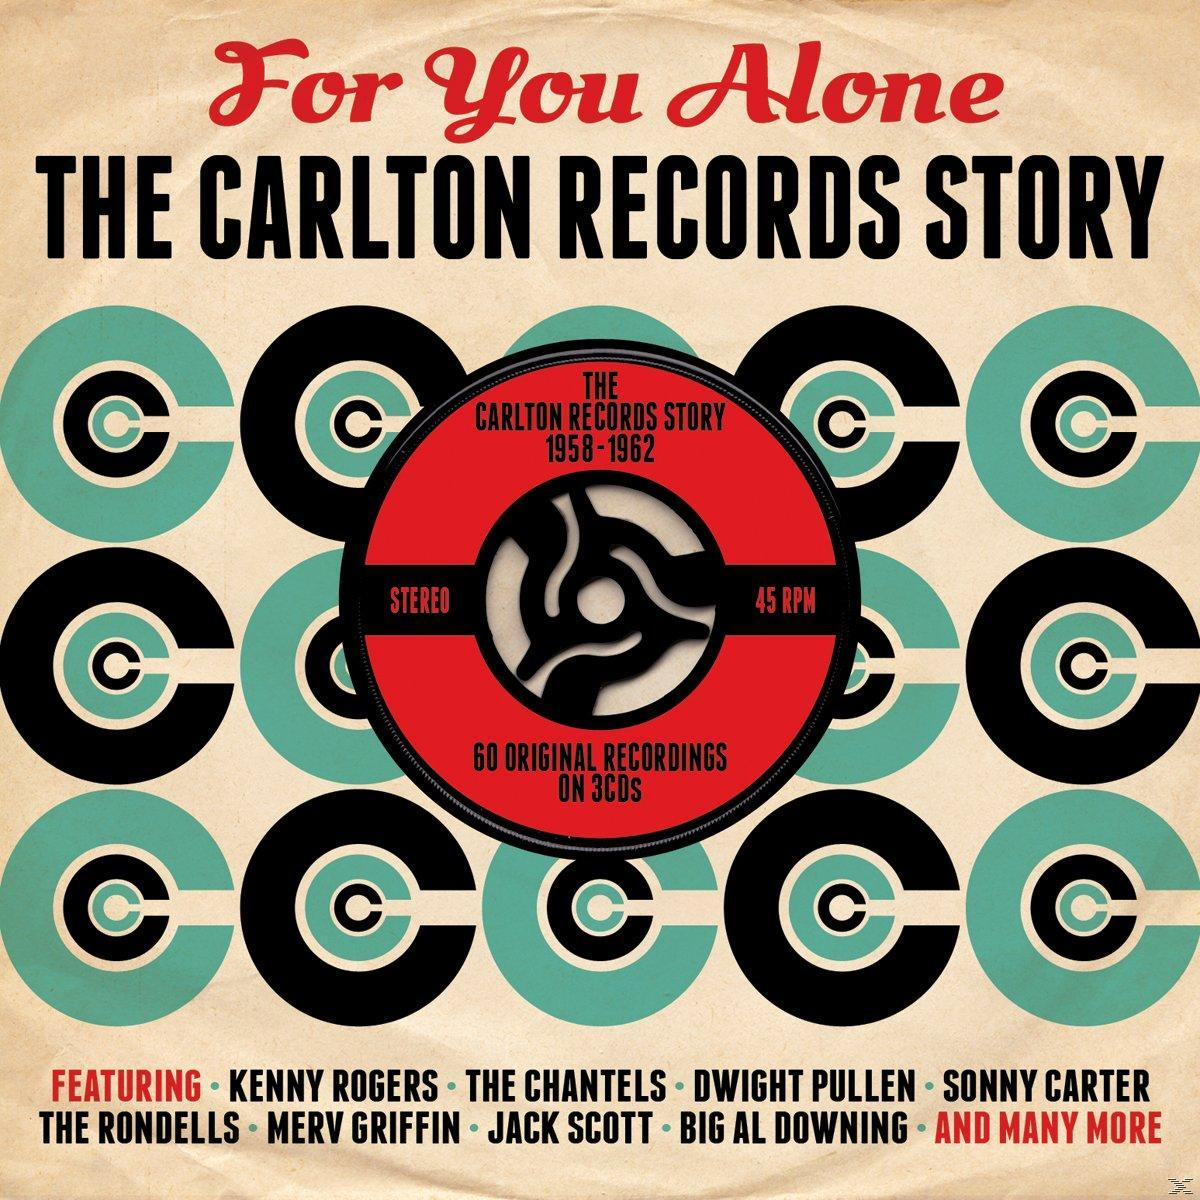 Alone-Carlton (CD) You - - For VARIOUS